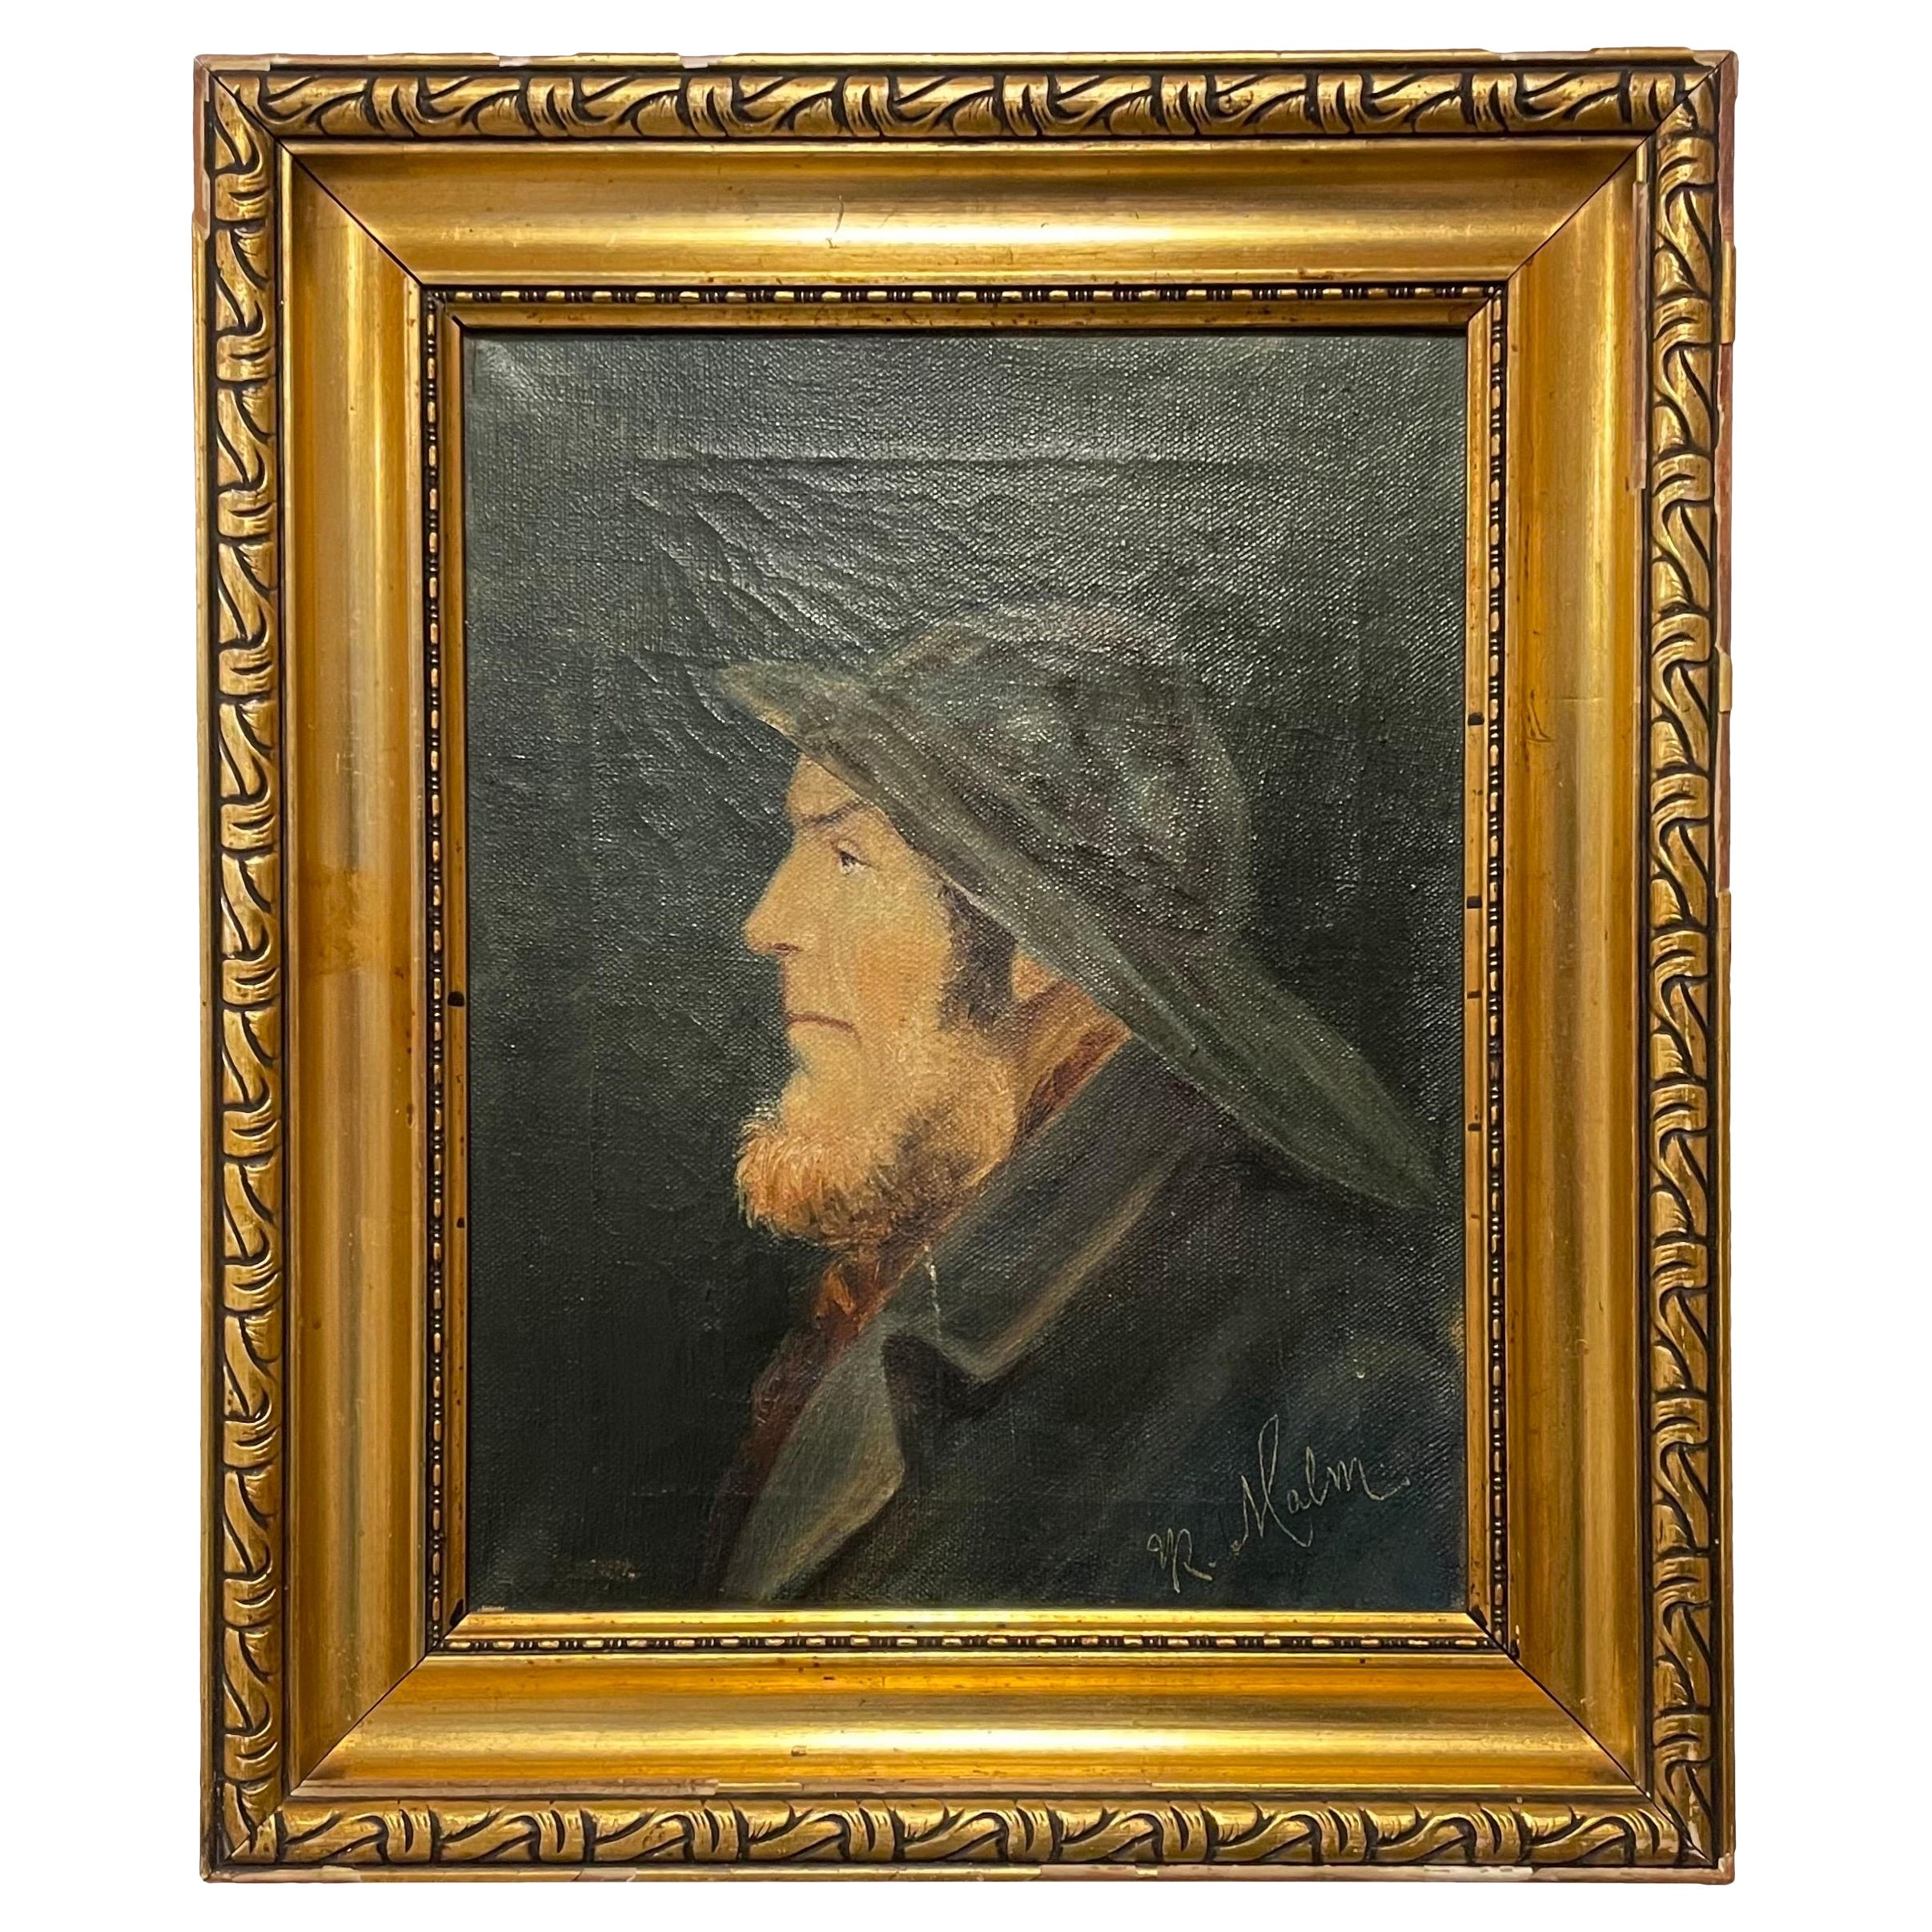 Early 20th century Danish oil painting of fisherman from Skagen